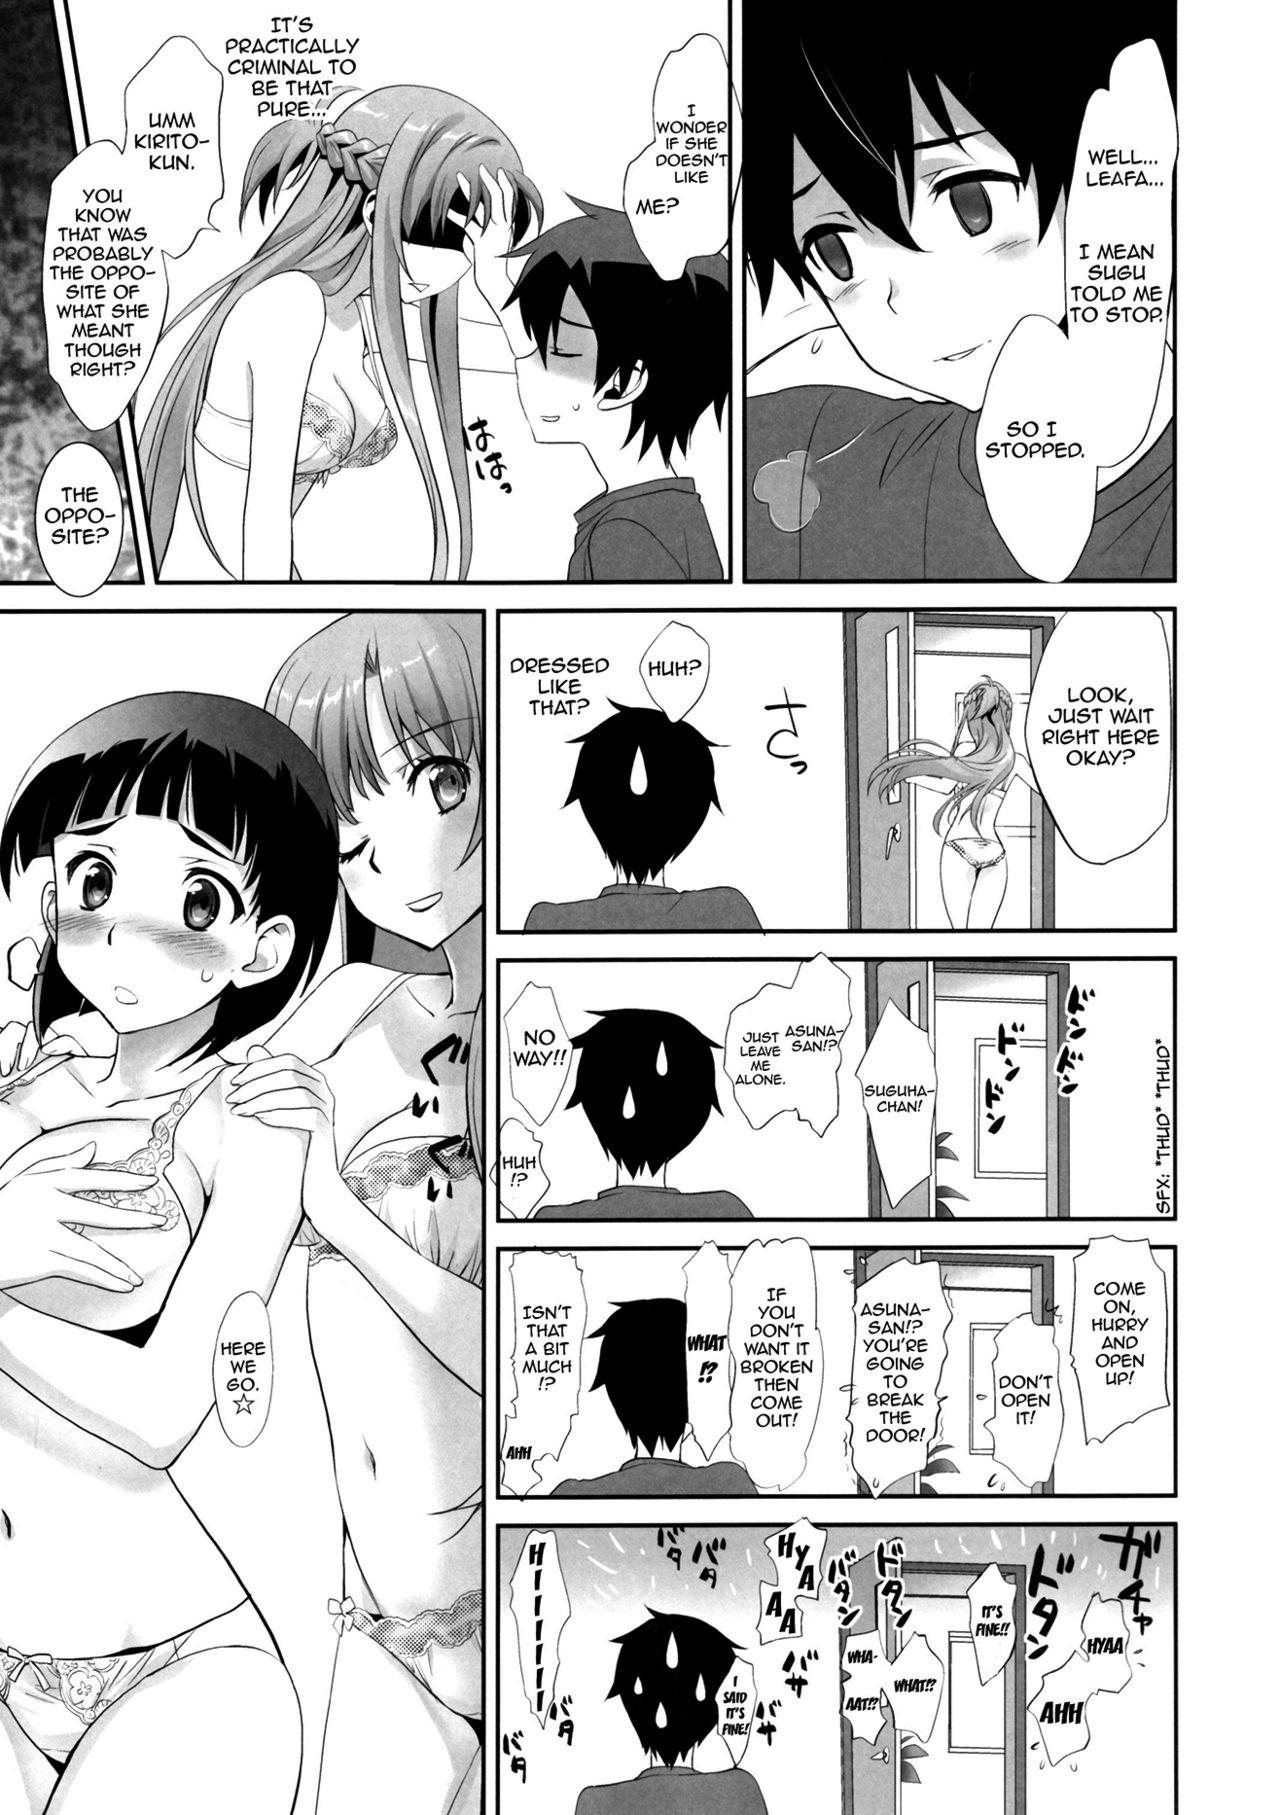 Celebrity Nudes Sunny-side up? - Sword art online Gay Reality - Page 12